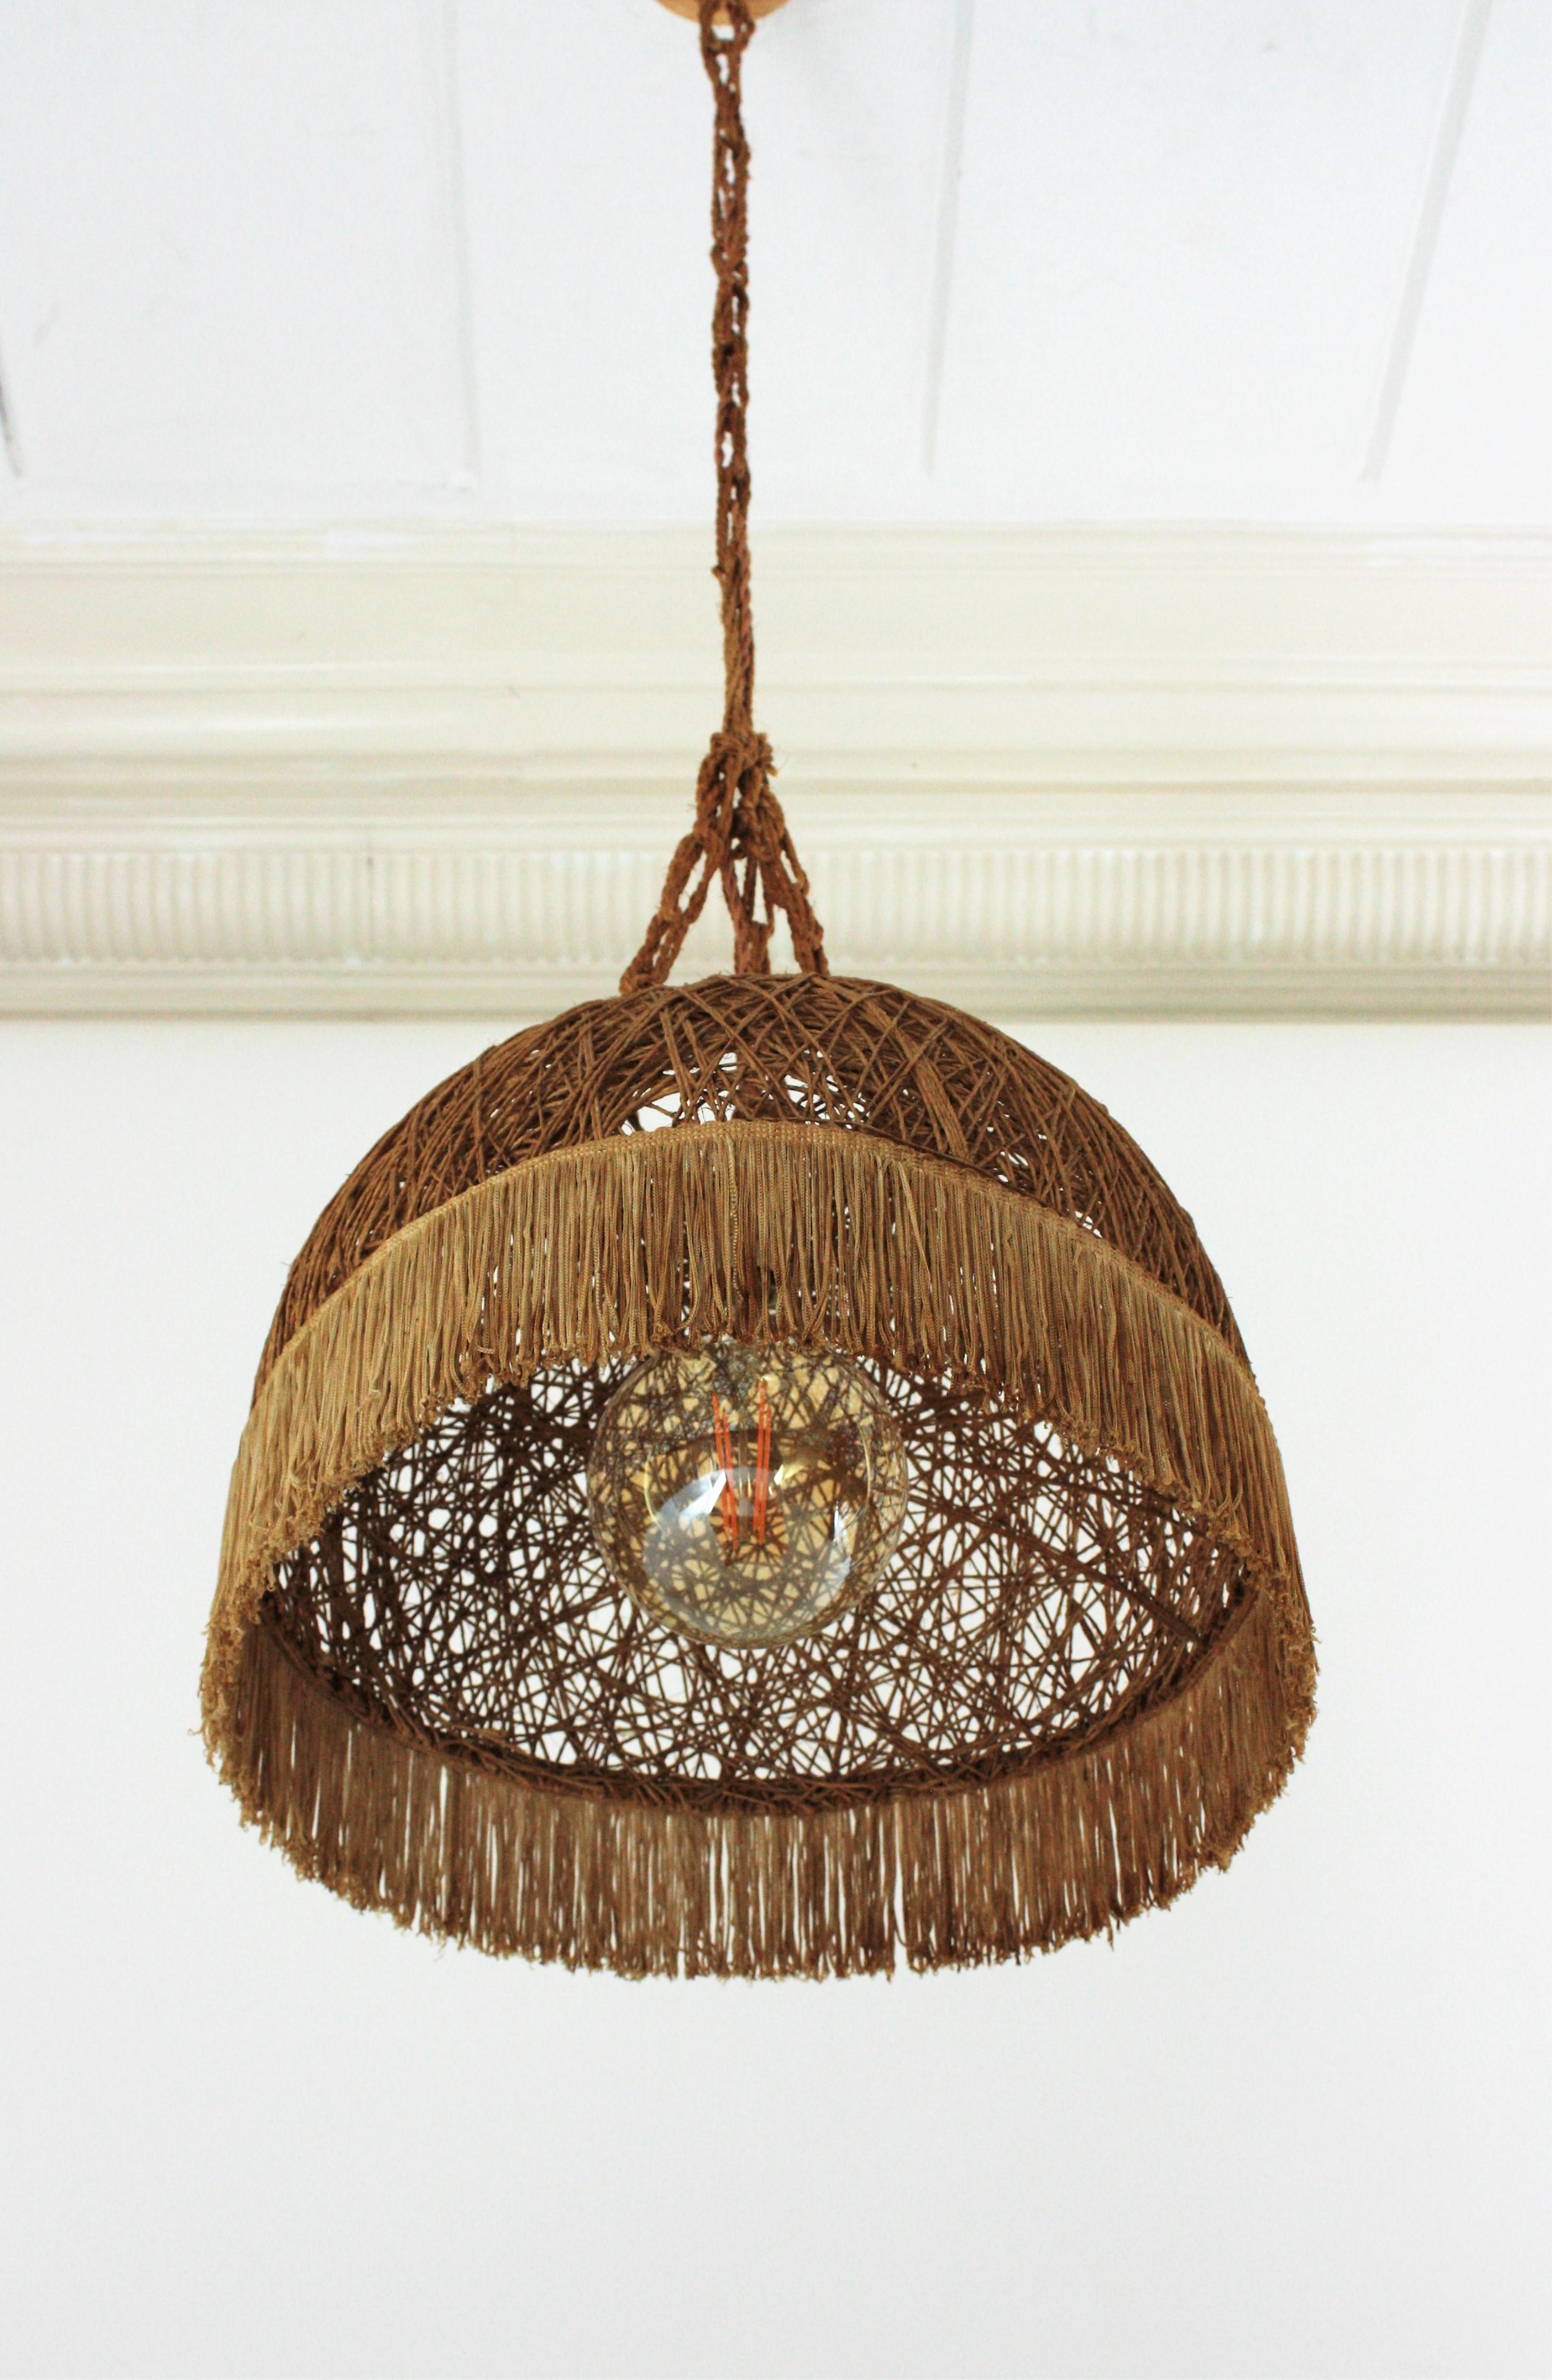 Jute Spanish Rope Hand Woven Pendant Lamp / Suspension with Fringe For Sale